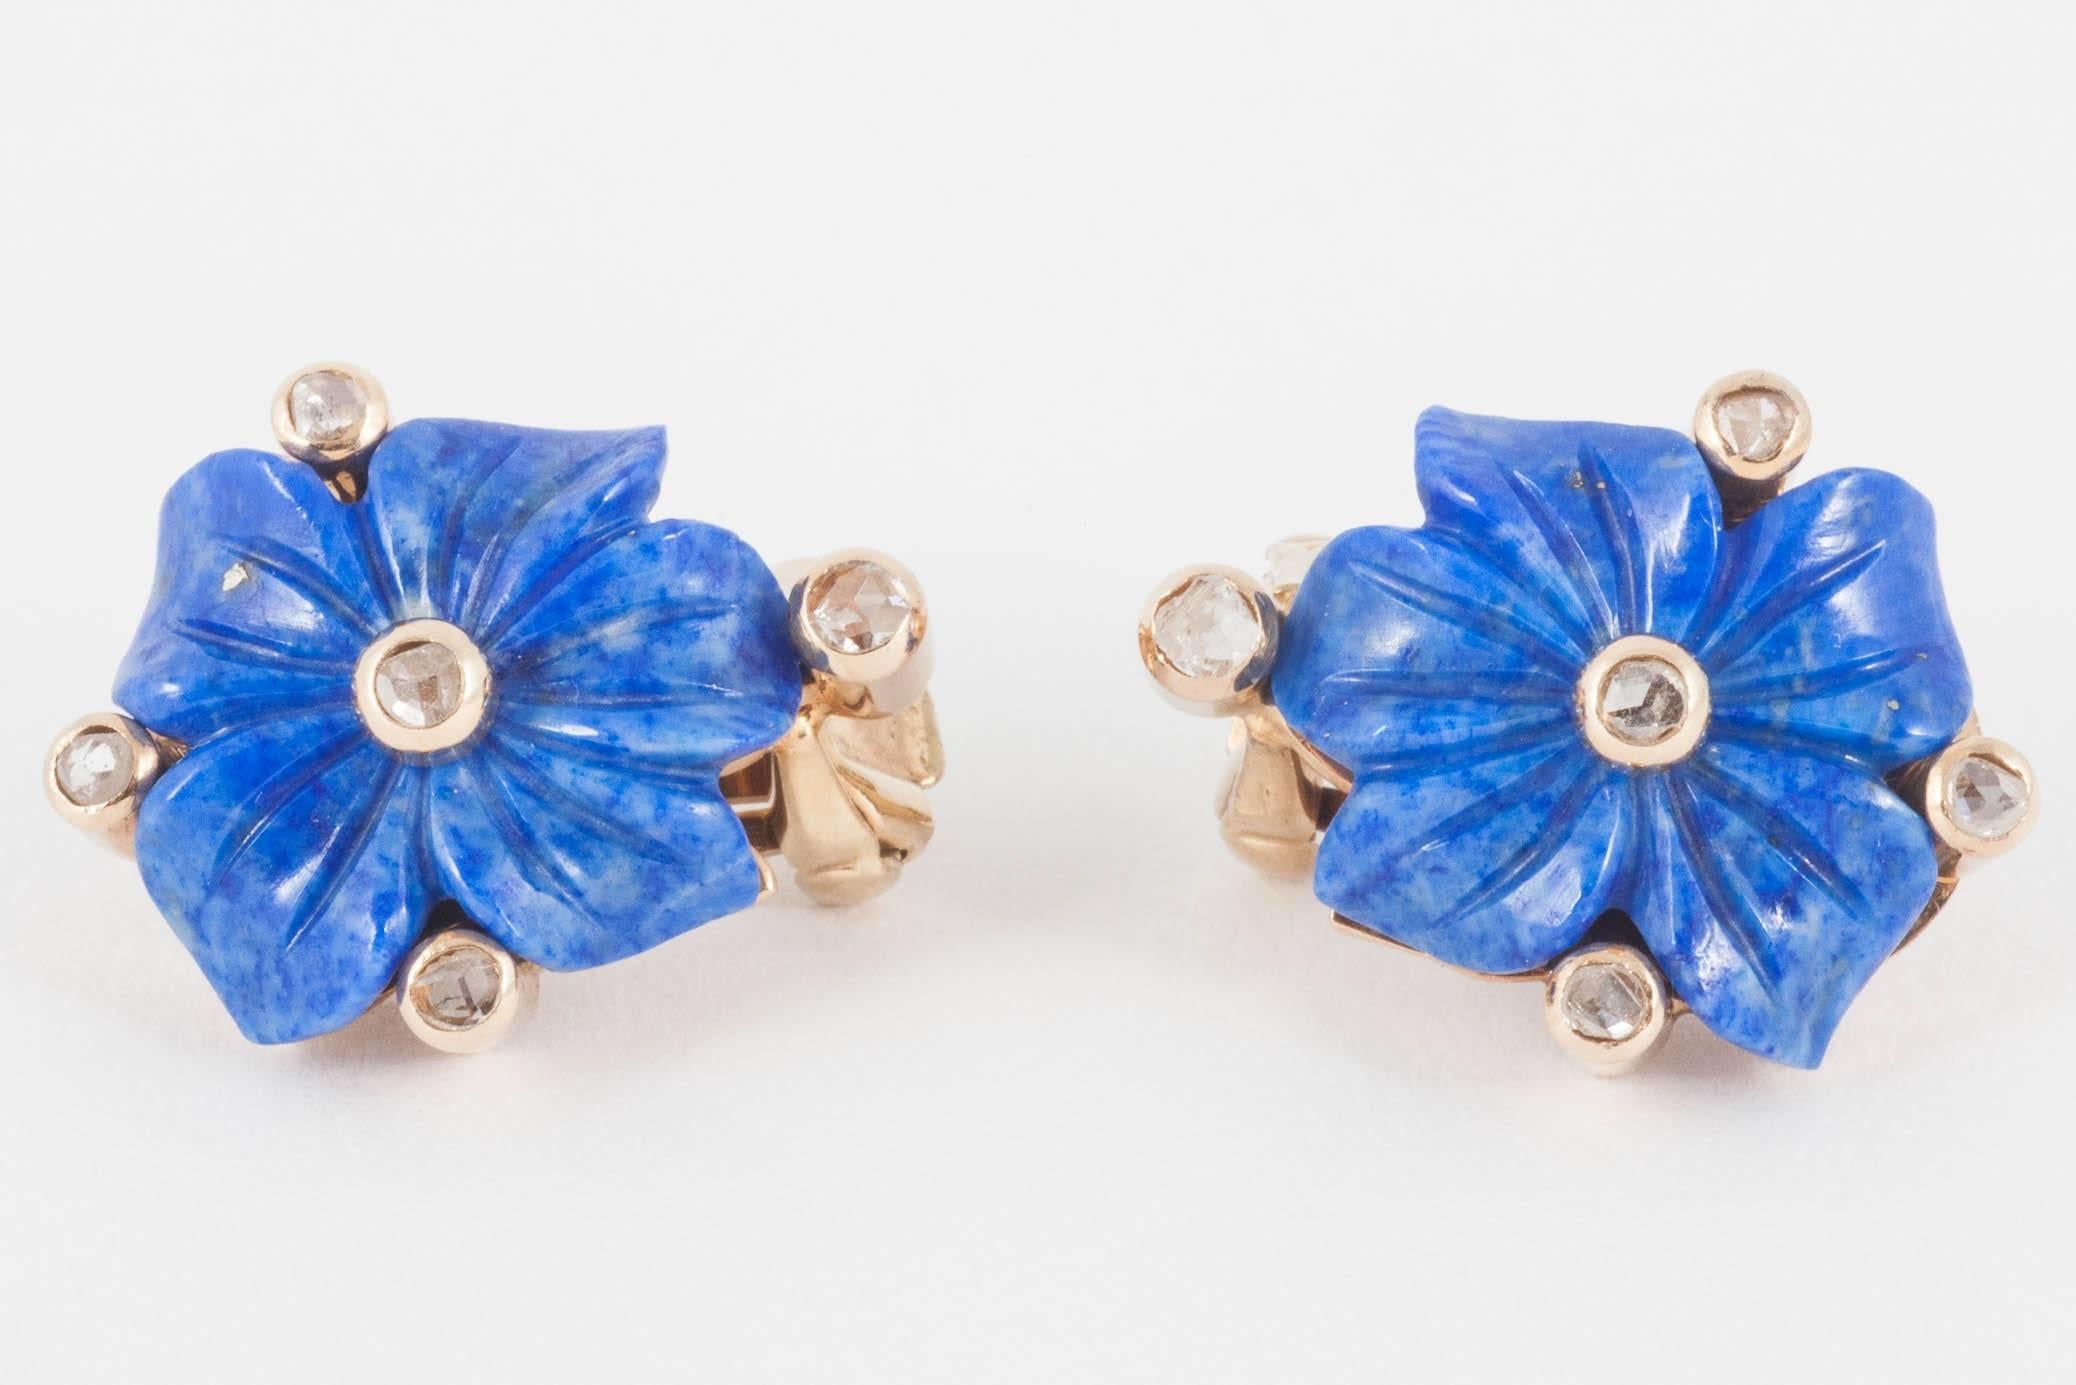 Pair of 18ct yellow gold earrings set with a lapis lazuli carved flower head with five,rose cut diamond points,French marked with clip and pegs ear fittings,c,1950